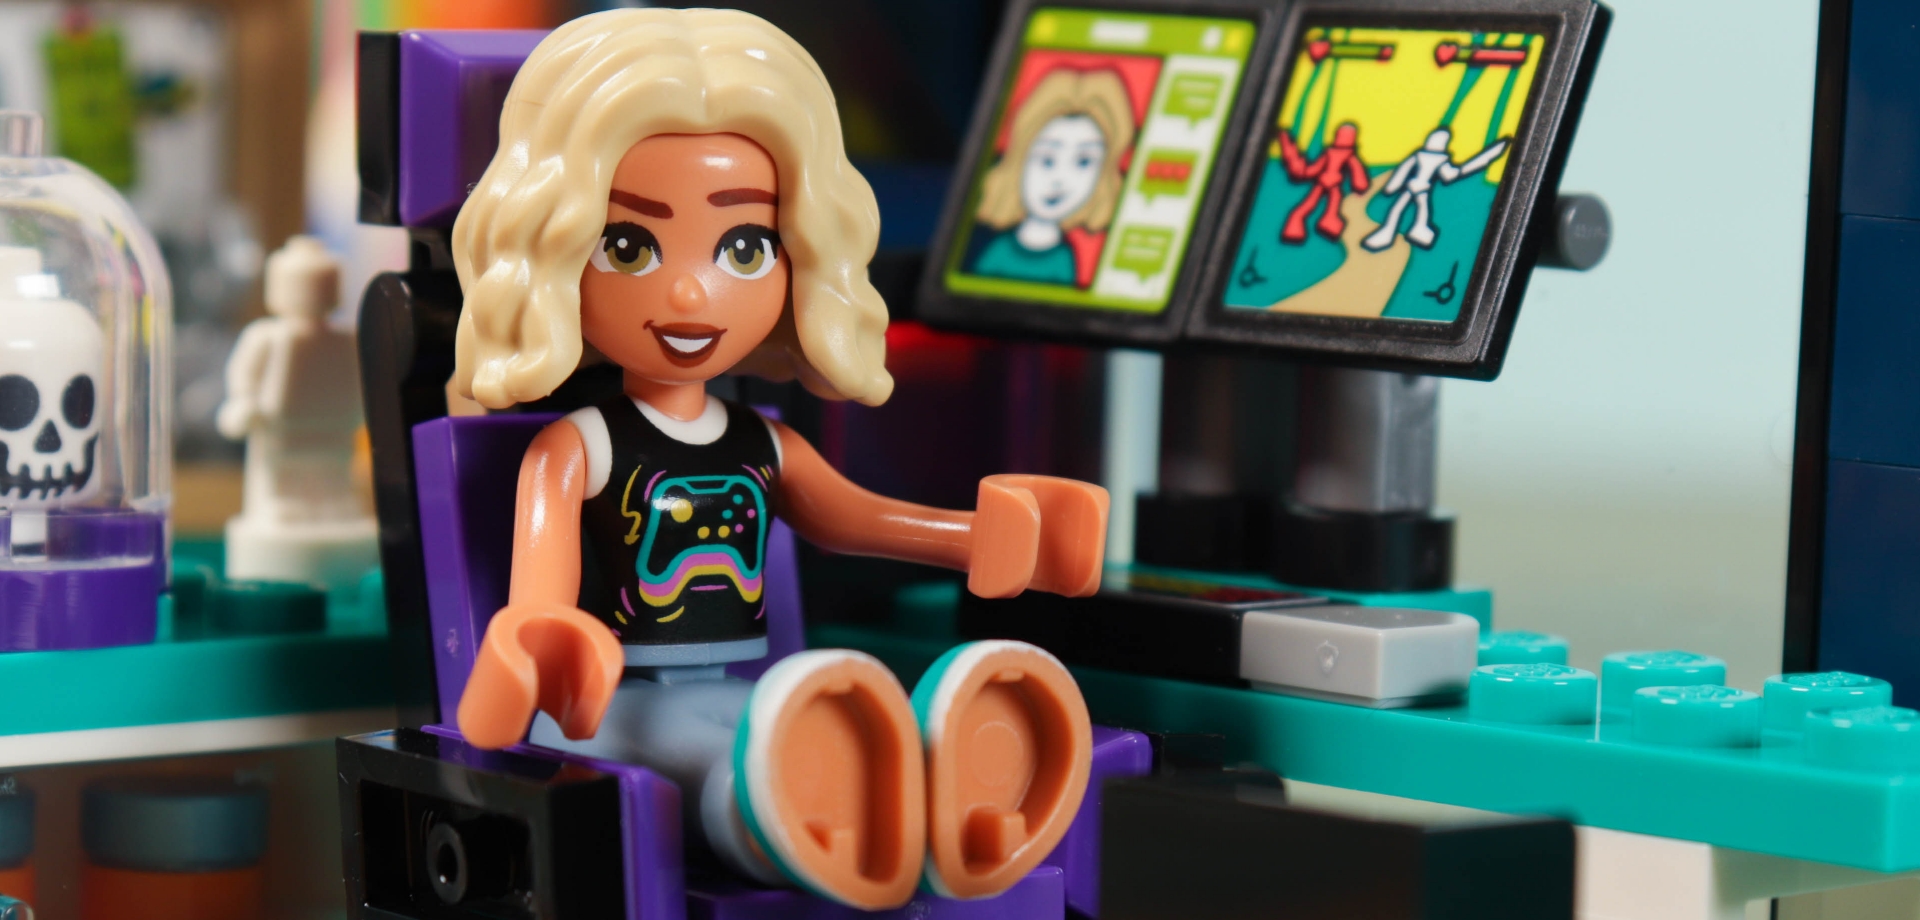 LEGO Friends - Breaking Down The Brick Walls With Legos For Girls